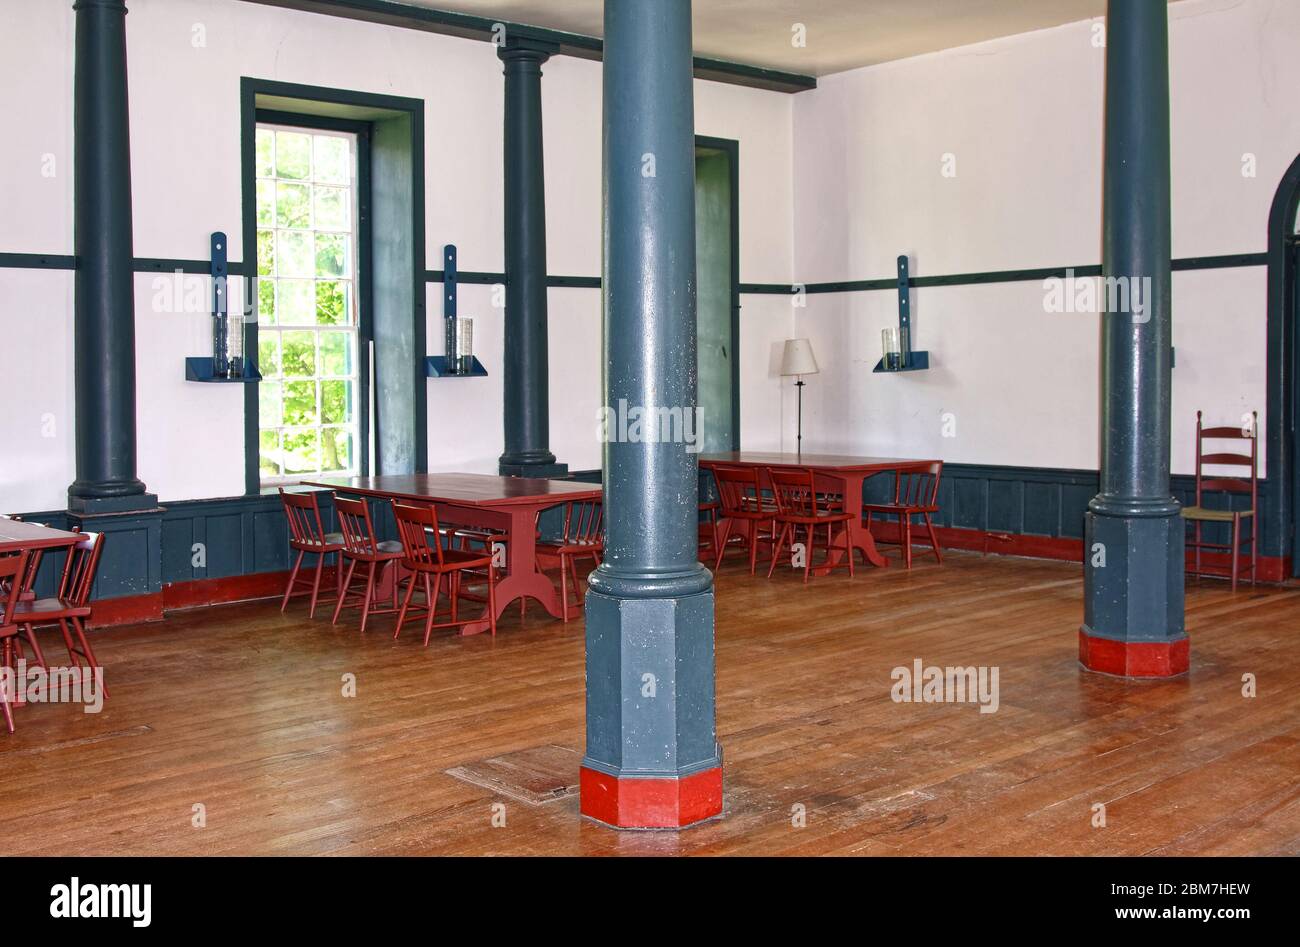 original dining room, plain tables, chairs, pillars, wood floor, hanging candles, unadorned walls, Shaker Village of Pleasant Hill, defunct religious Stock Photo